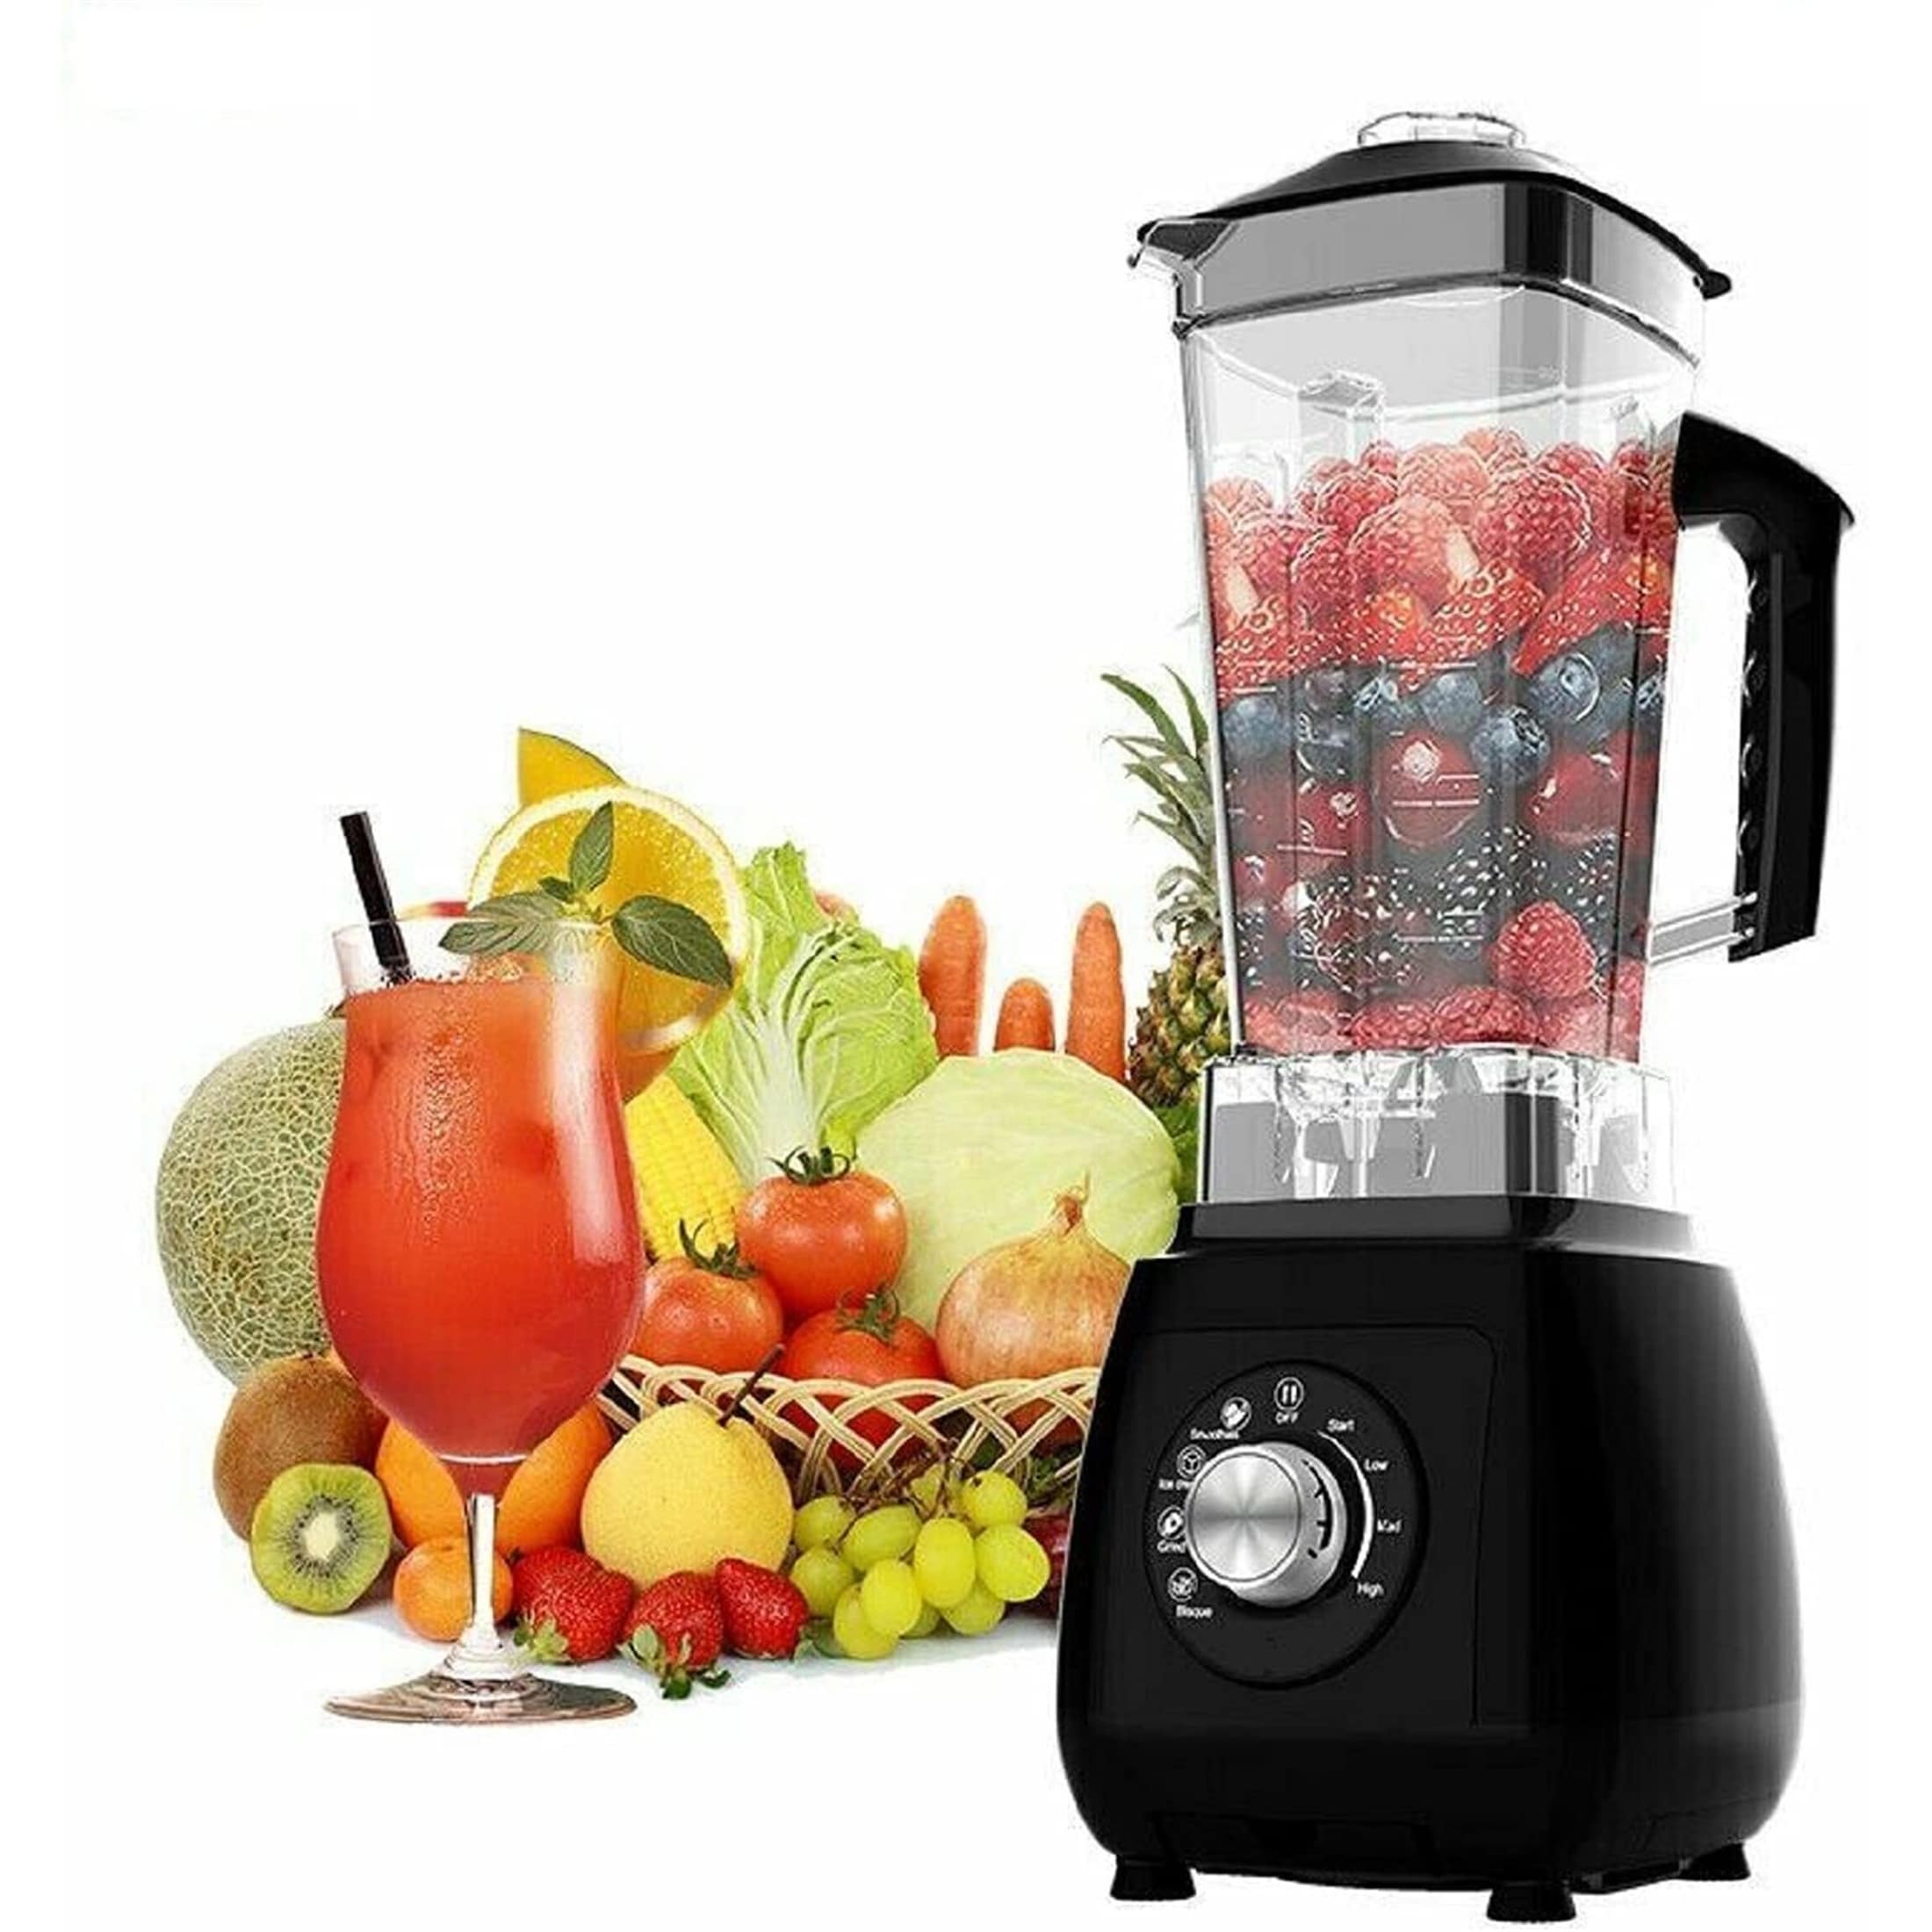 https://ak1.ostkcdn.com/images/products/is/images/direct/49cdab84039441711514175cb08af7edc479e9e3/Professional-Electric-Blenders-Soup-Smoothie-Shake-Mixer-Blend-Grind.jpg